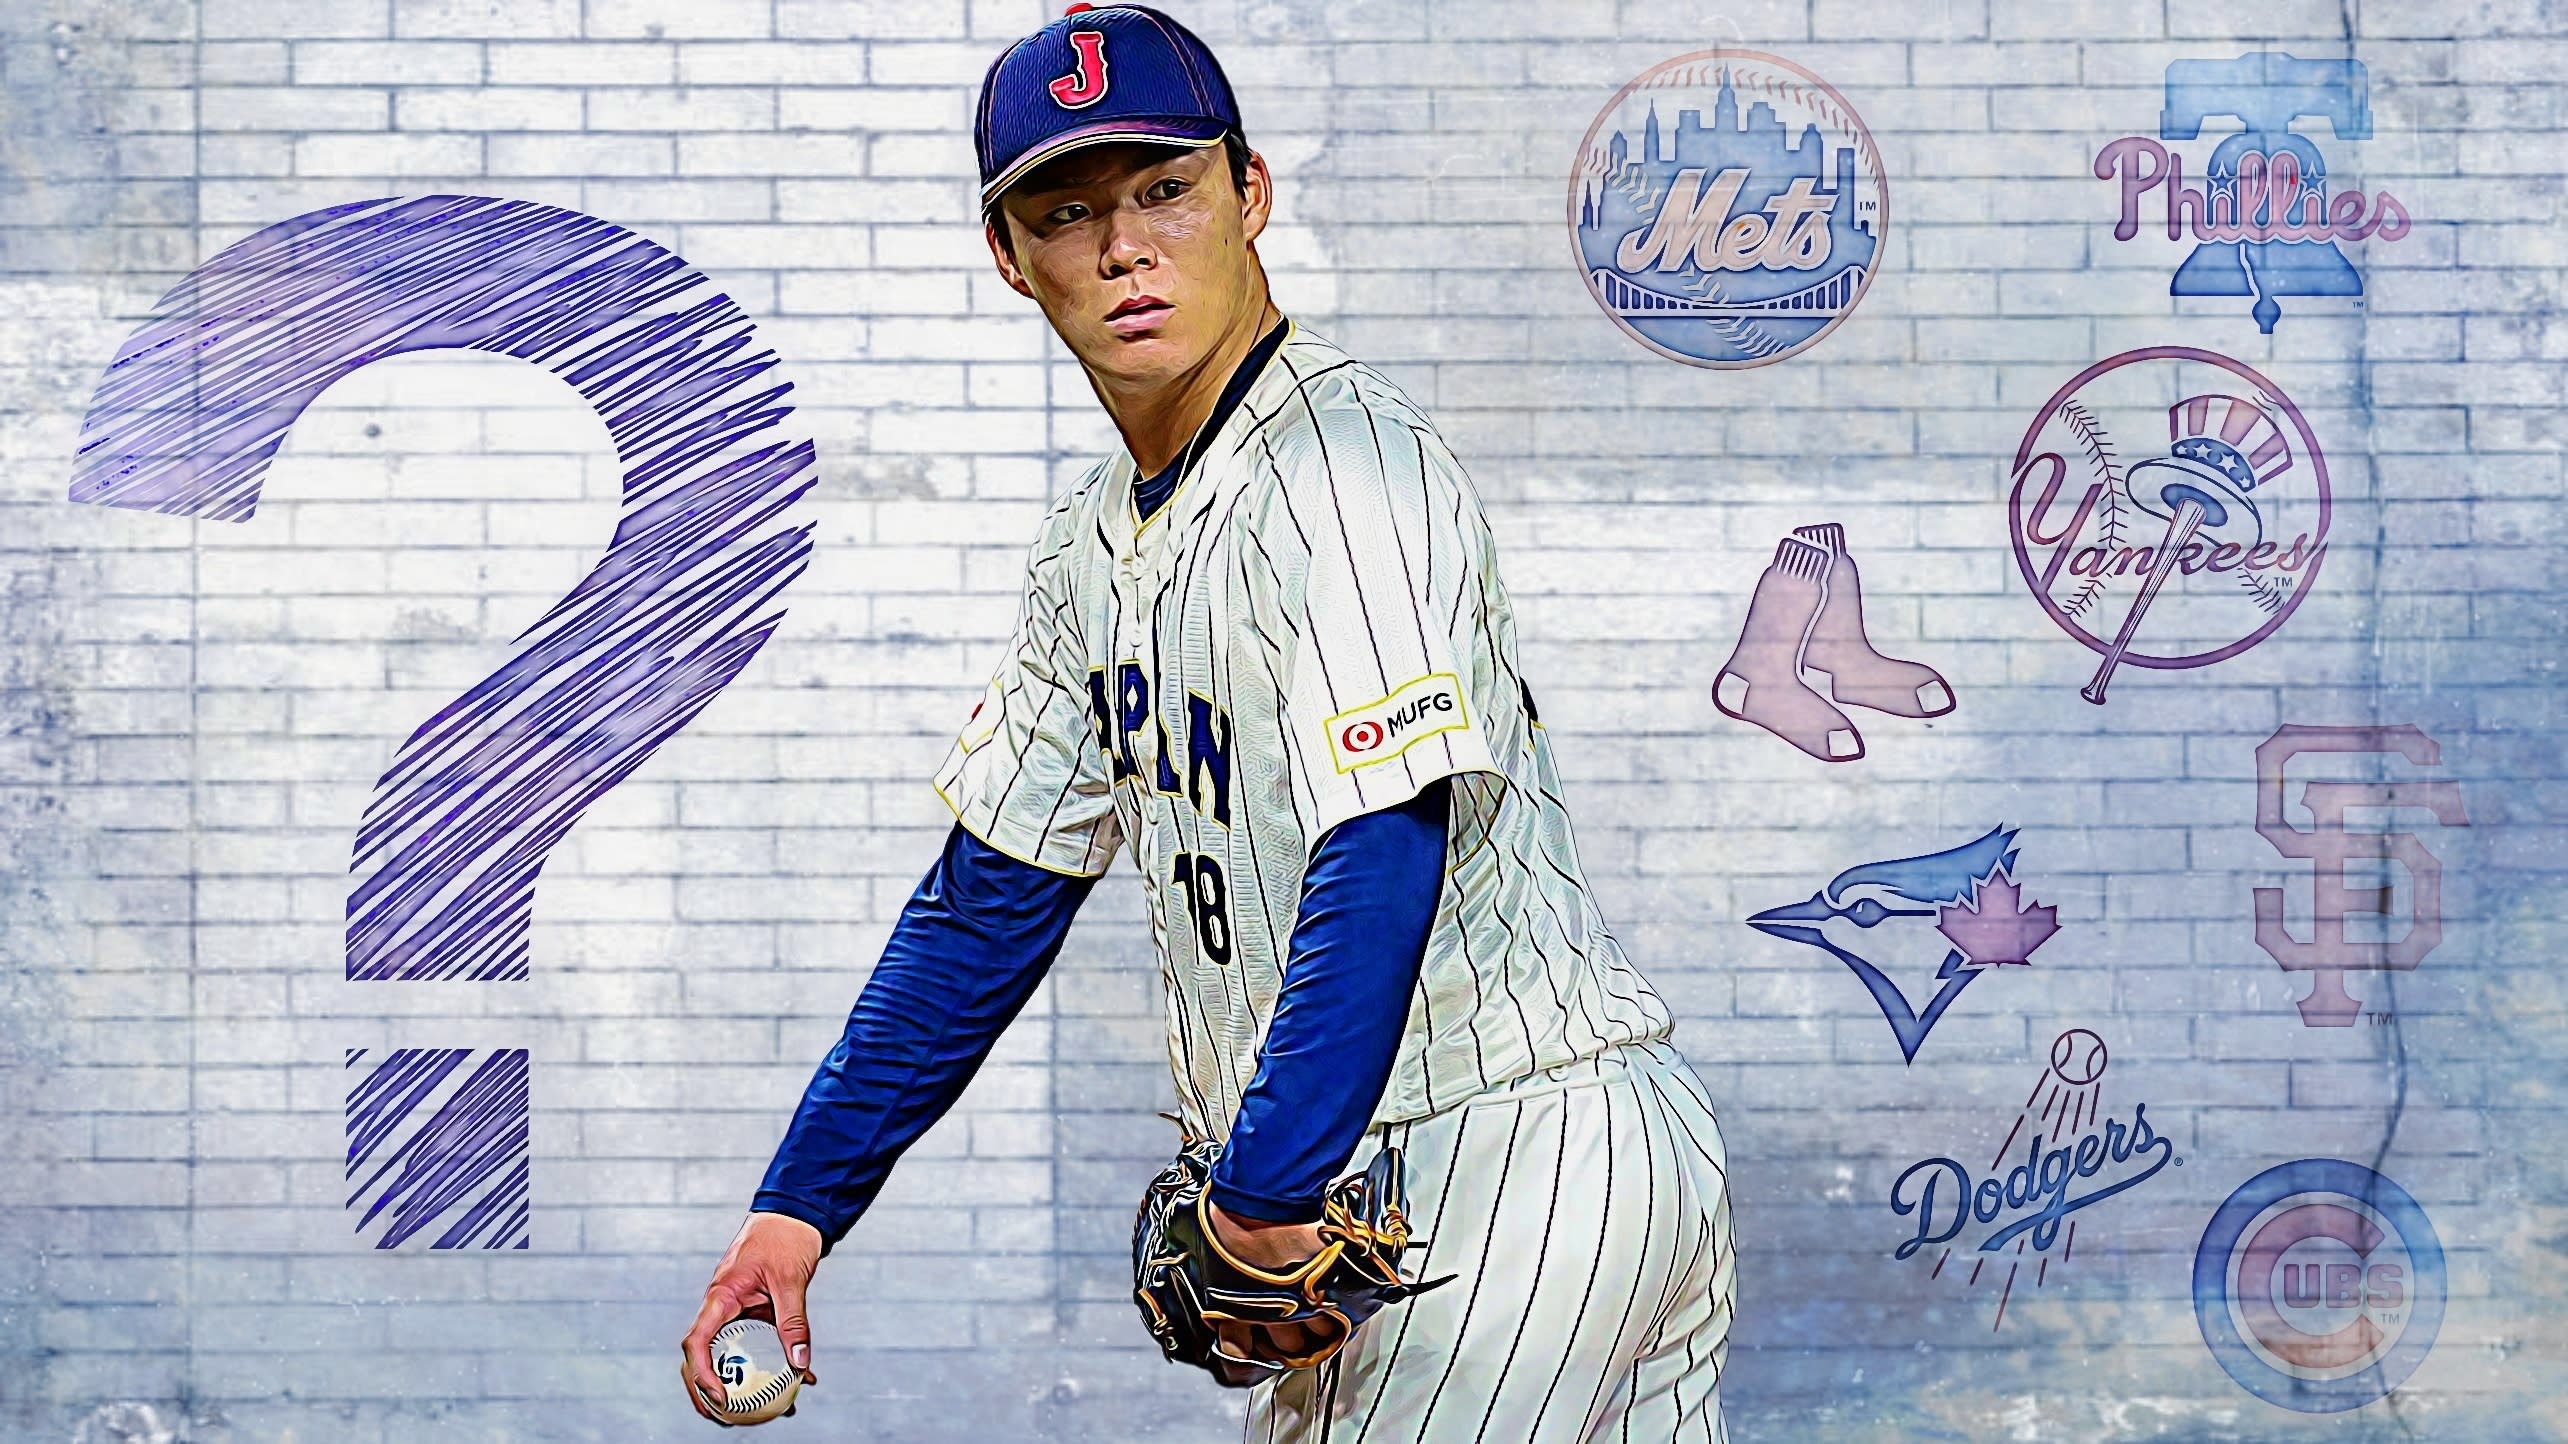 A photo illustration of Yoshinobu Yamamoto against a brick wall with a question mark and 8 team logos